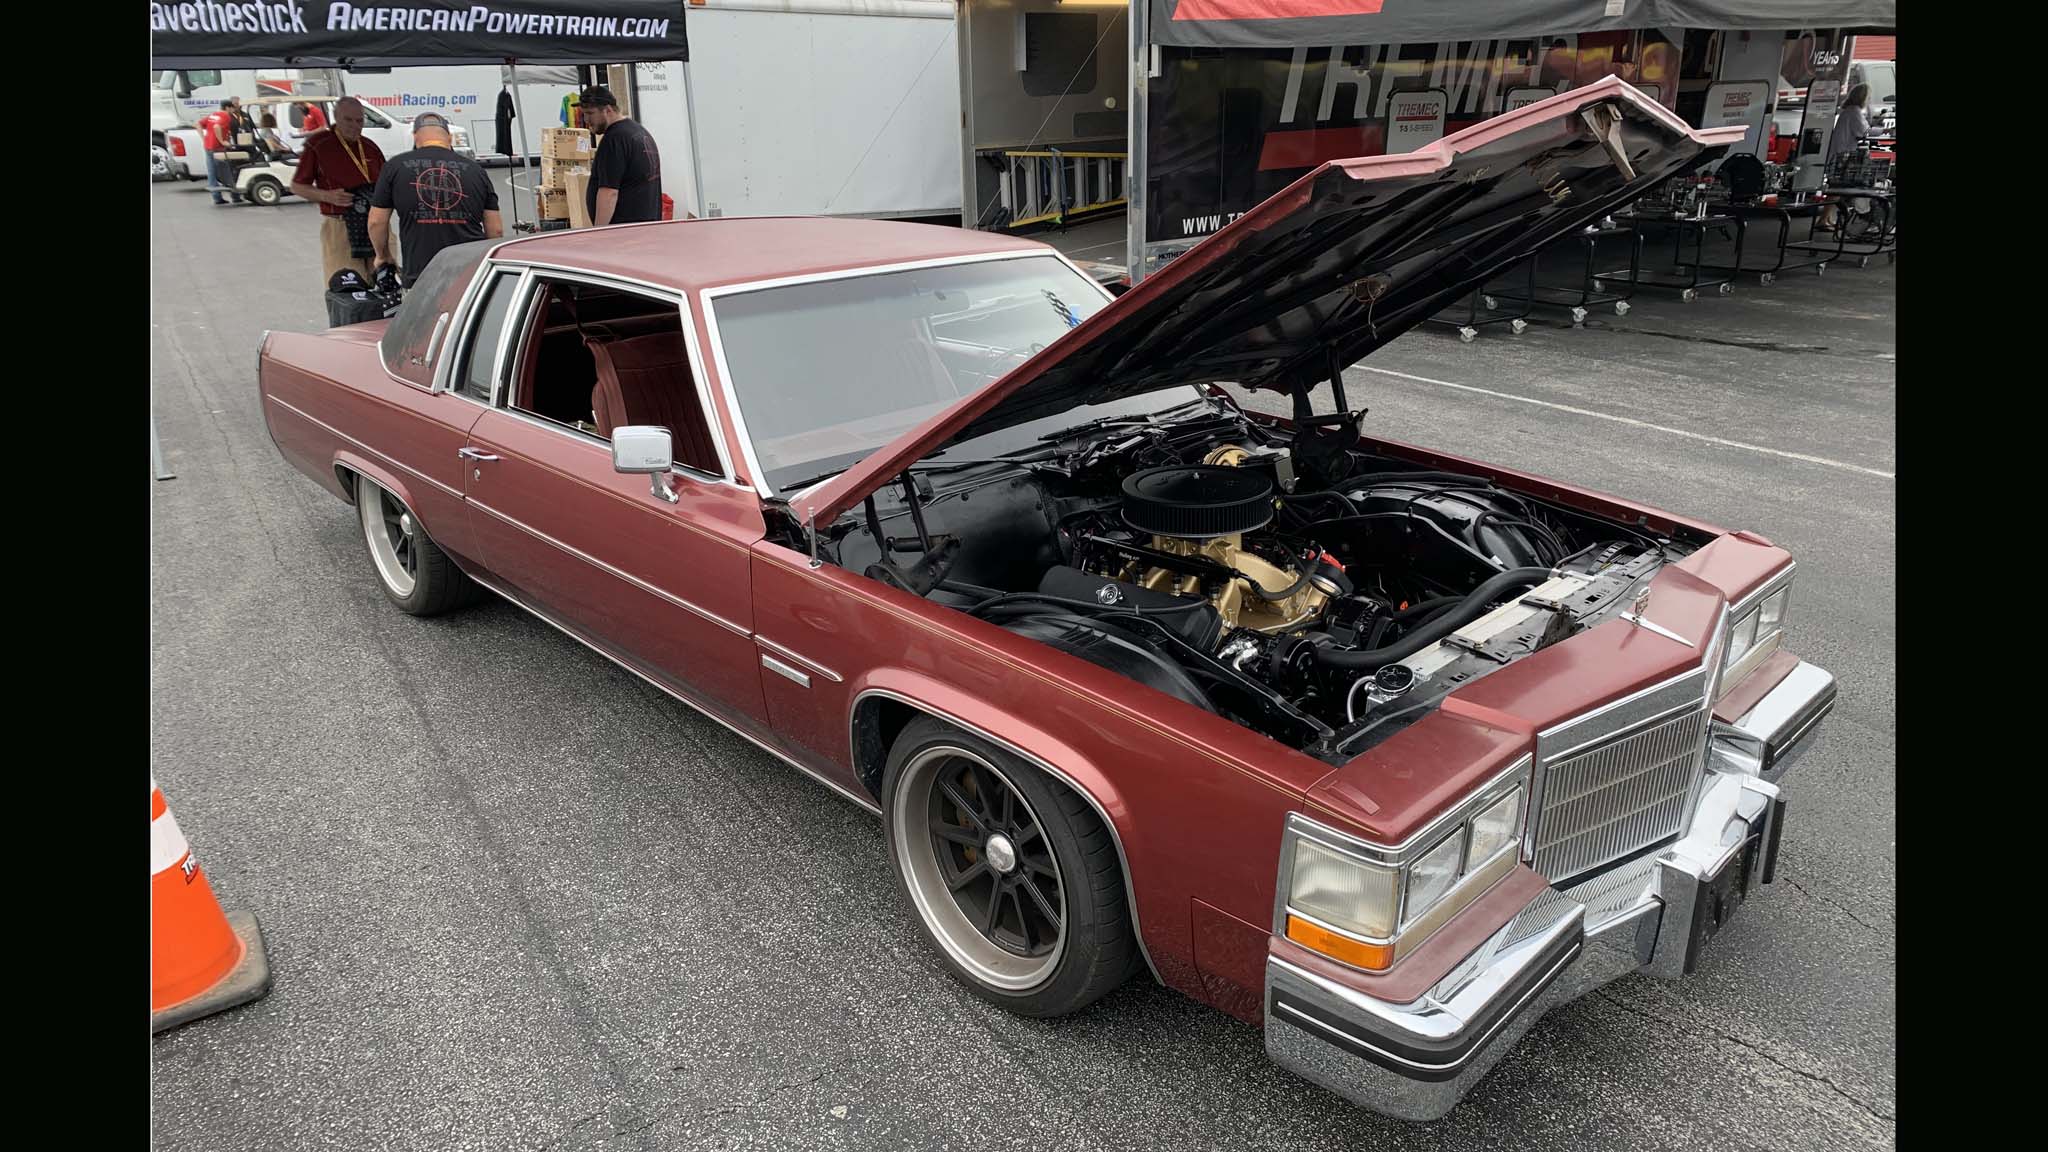 002-1983-cadillac-coupe-deville-caddy-chicken-coupe-american-powertrain-ls-swap-6-speed-manual-tremec-magnum-holley-baer-pro-touring-warhawk-427.jpg